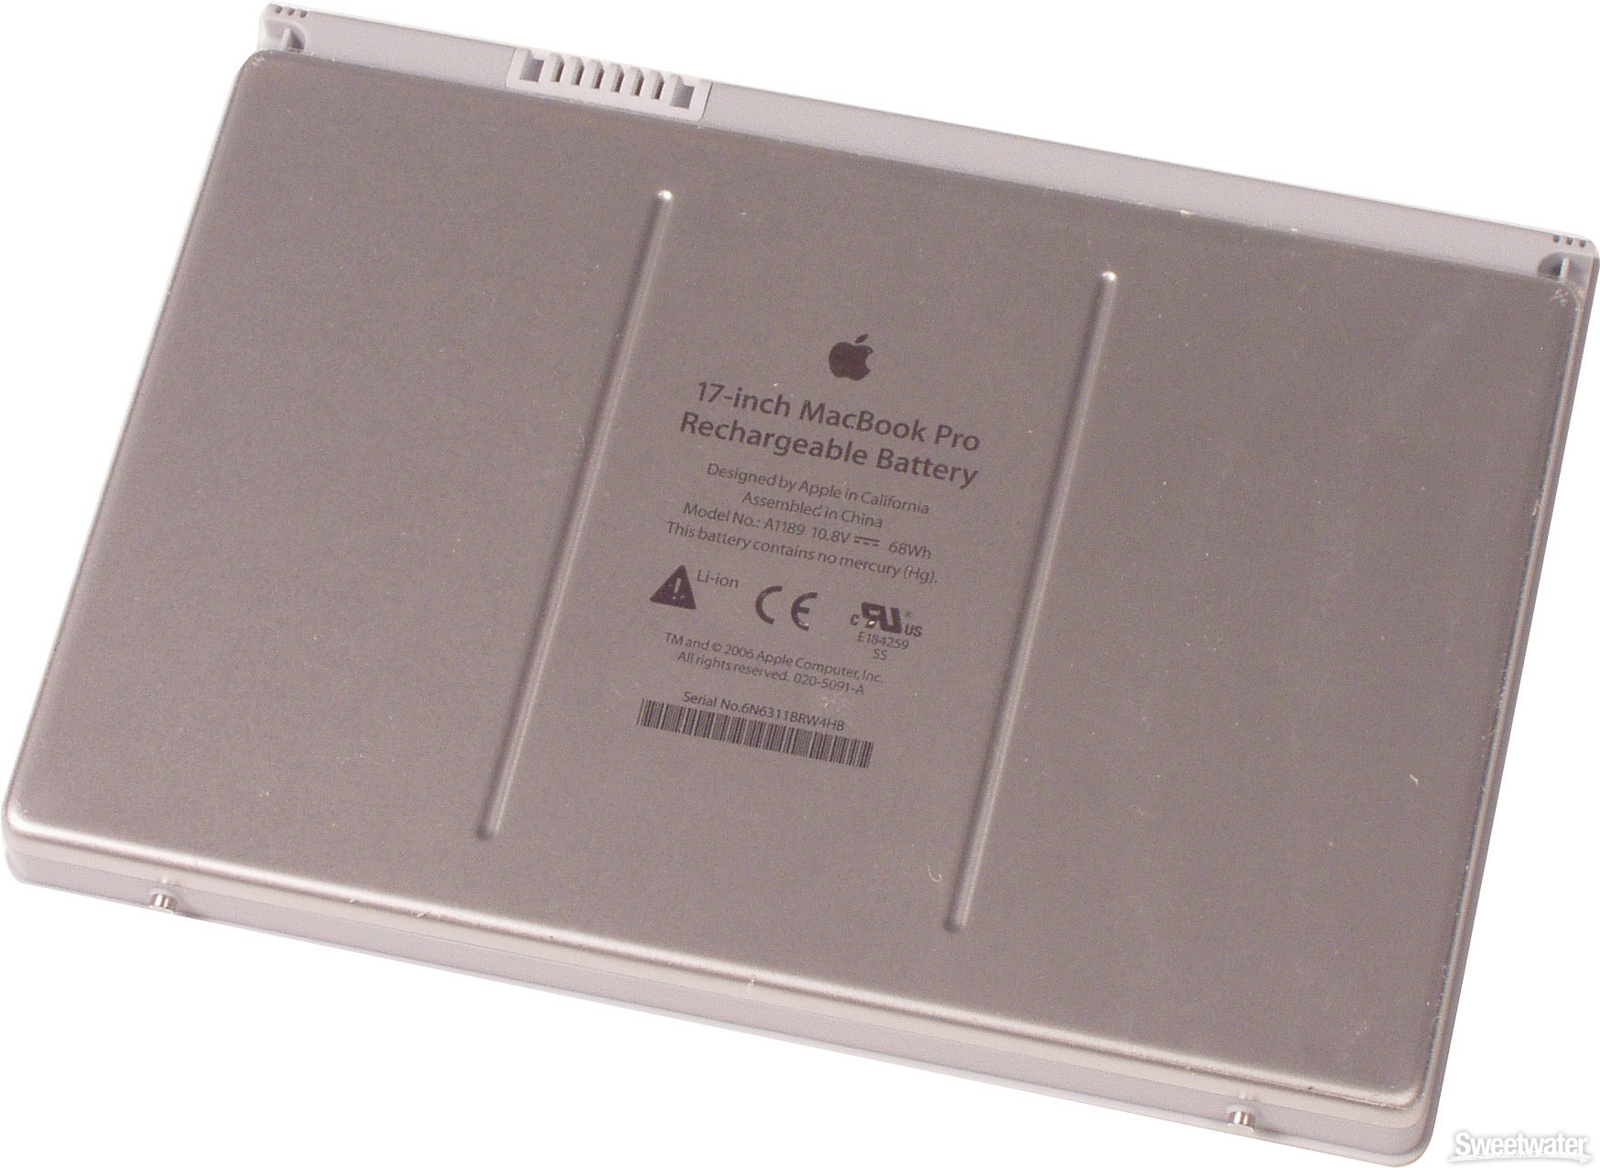 17 inch macbook pro rechargeable battery